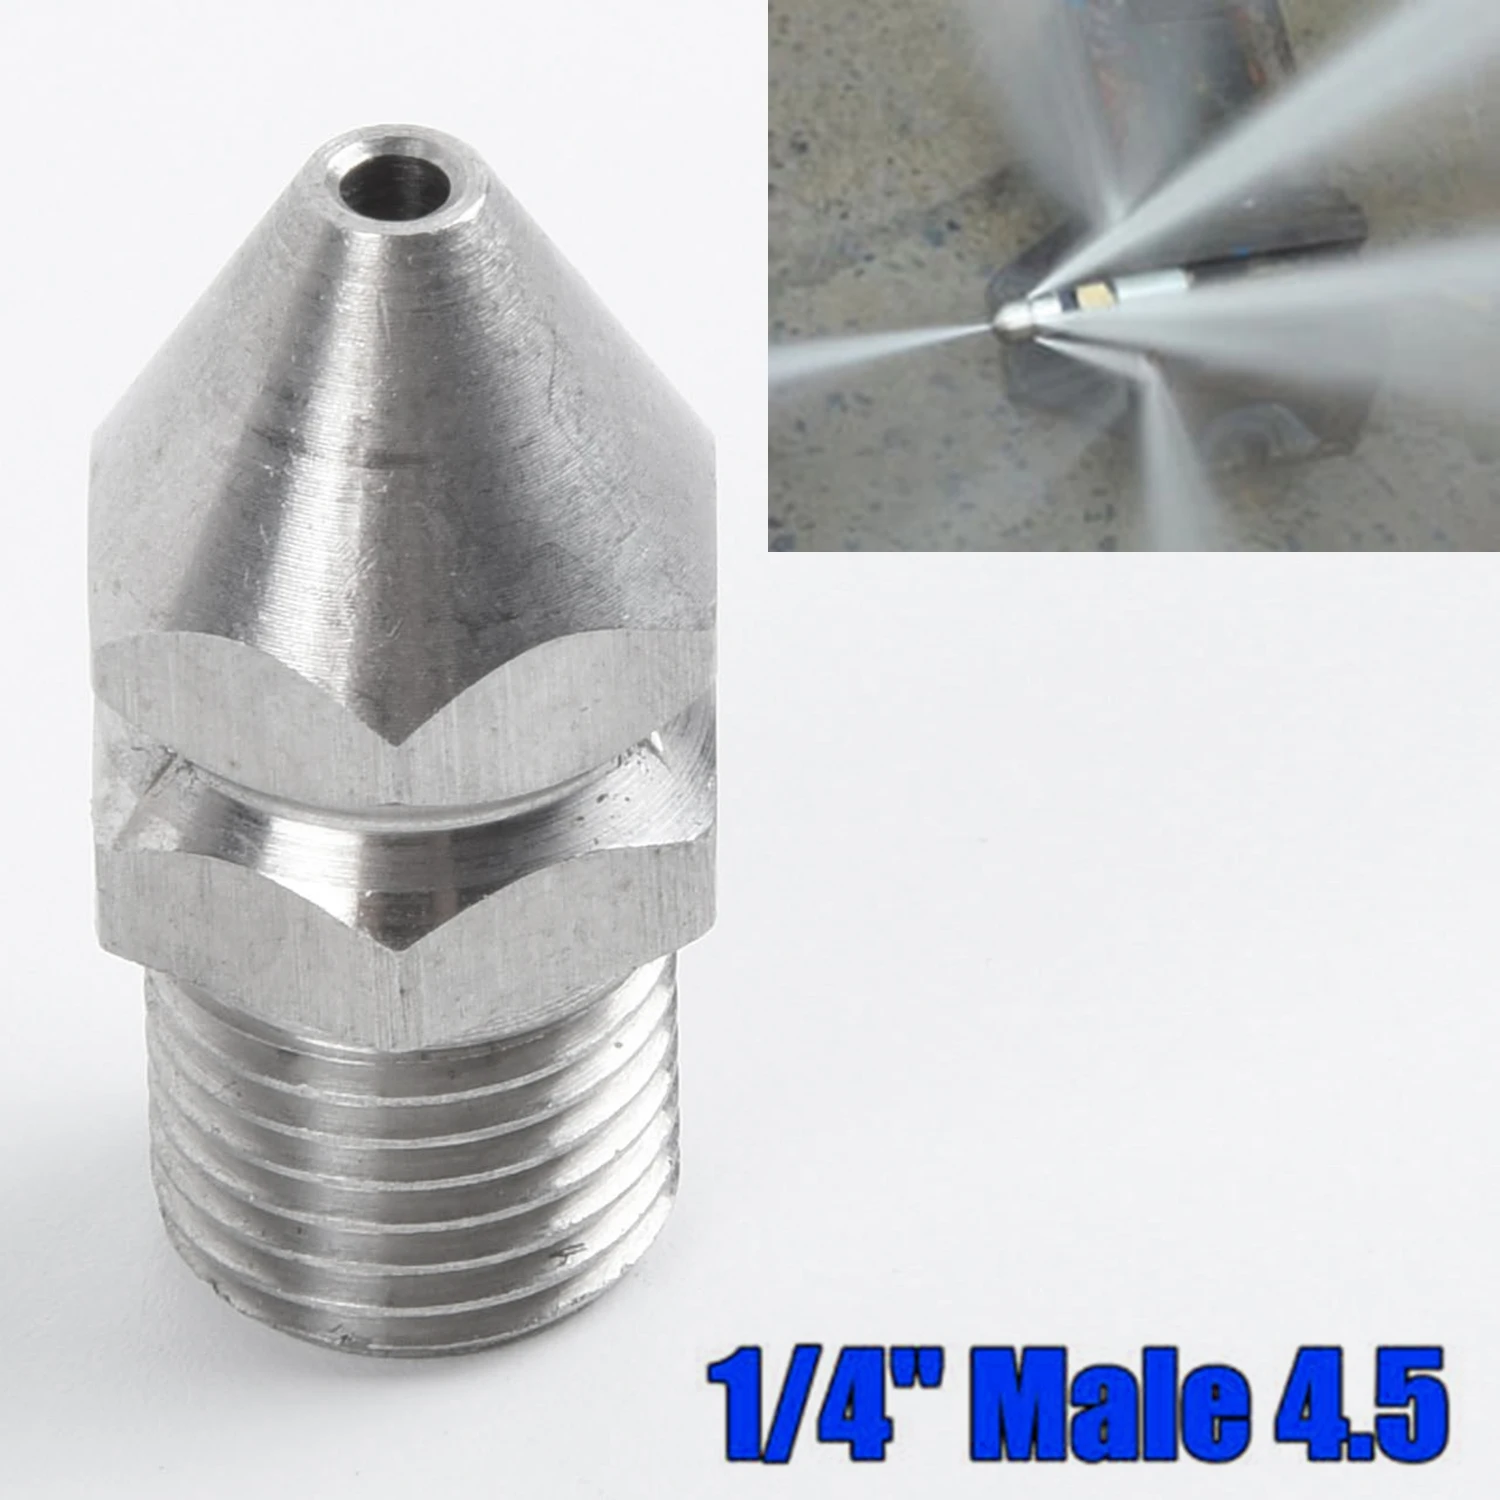 Pressure Washer Drain Sewer Cleaning Jetter Nozzle 4 Jet 1/4" Male High Pressure Cleaning Nozzle Drain Sewer Cleaning Spray